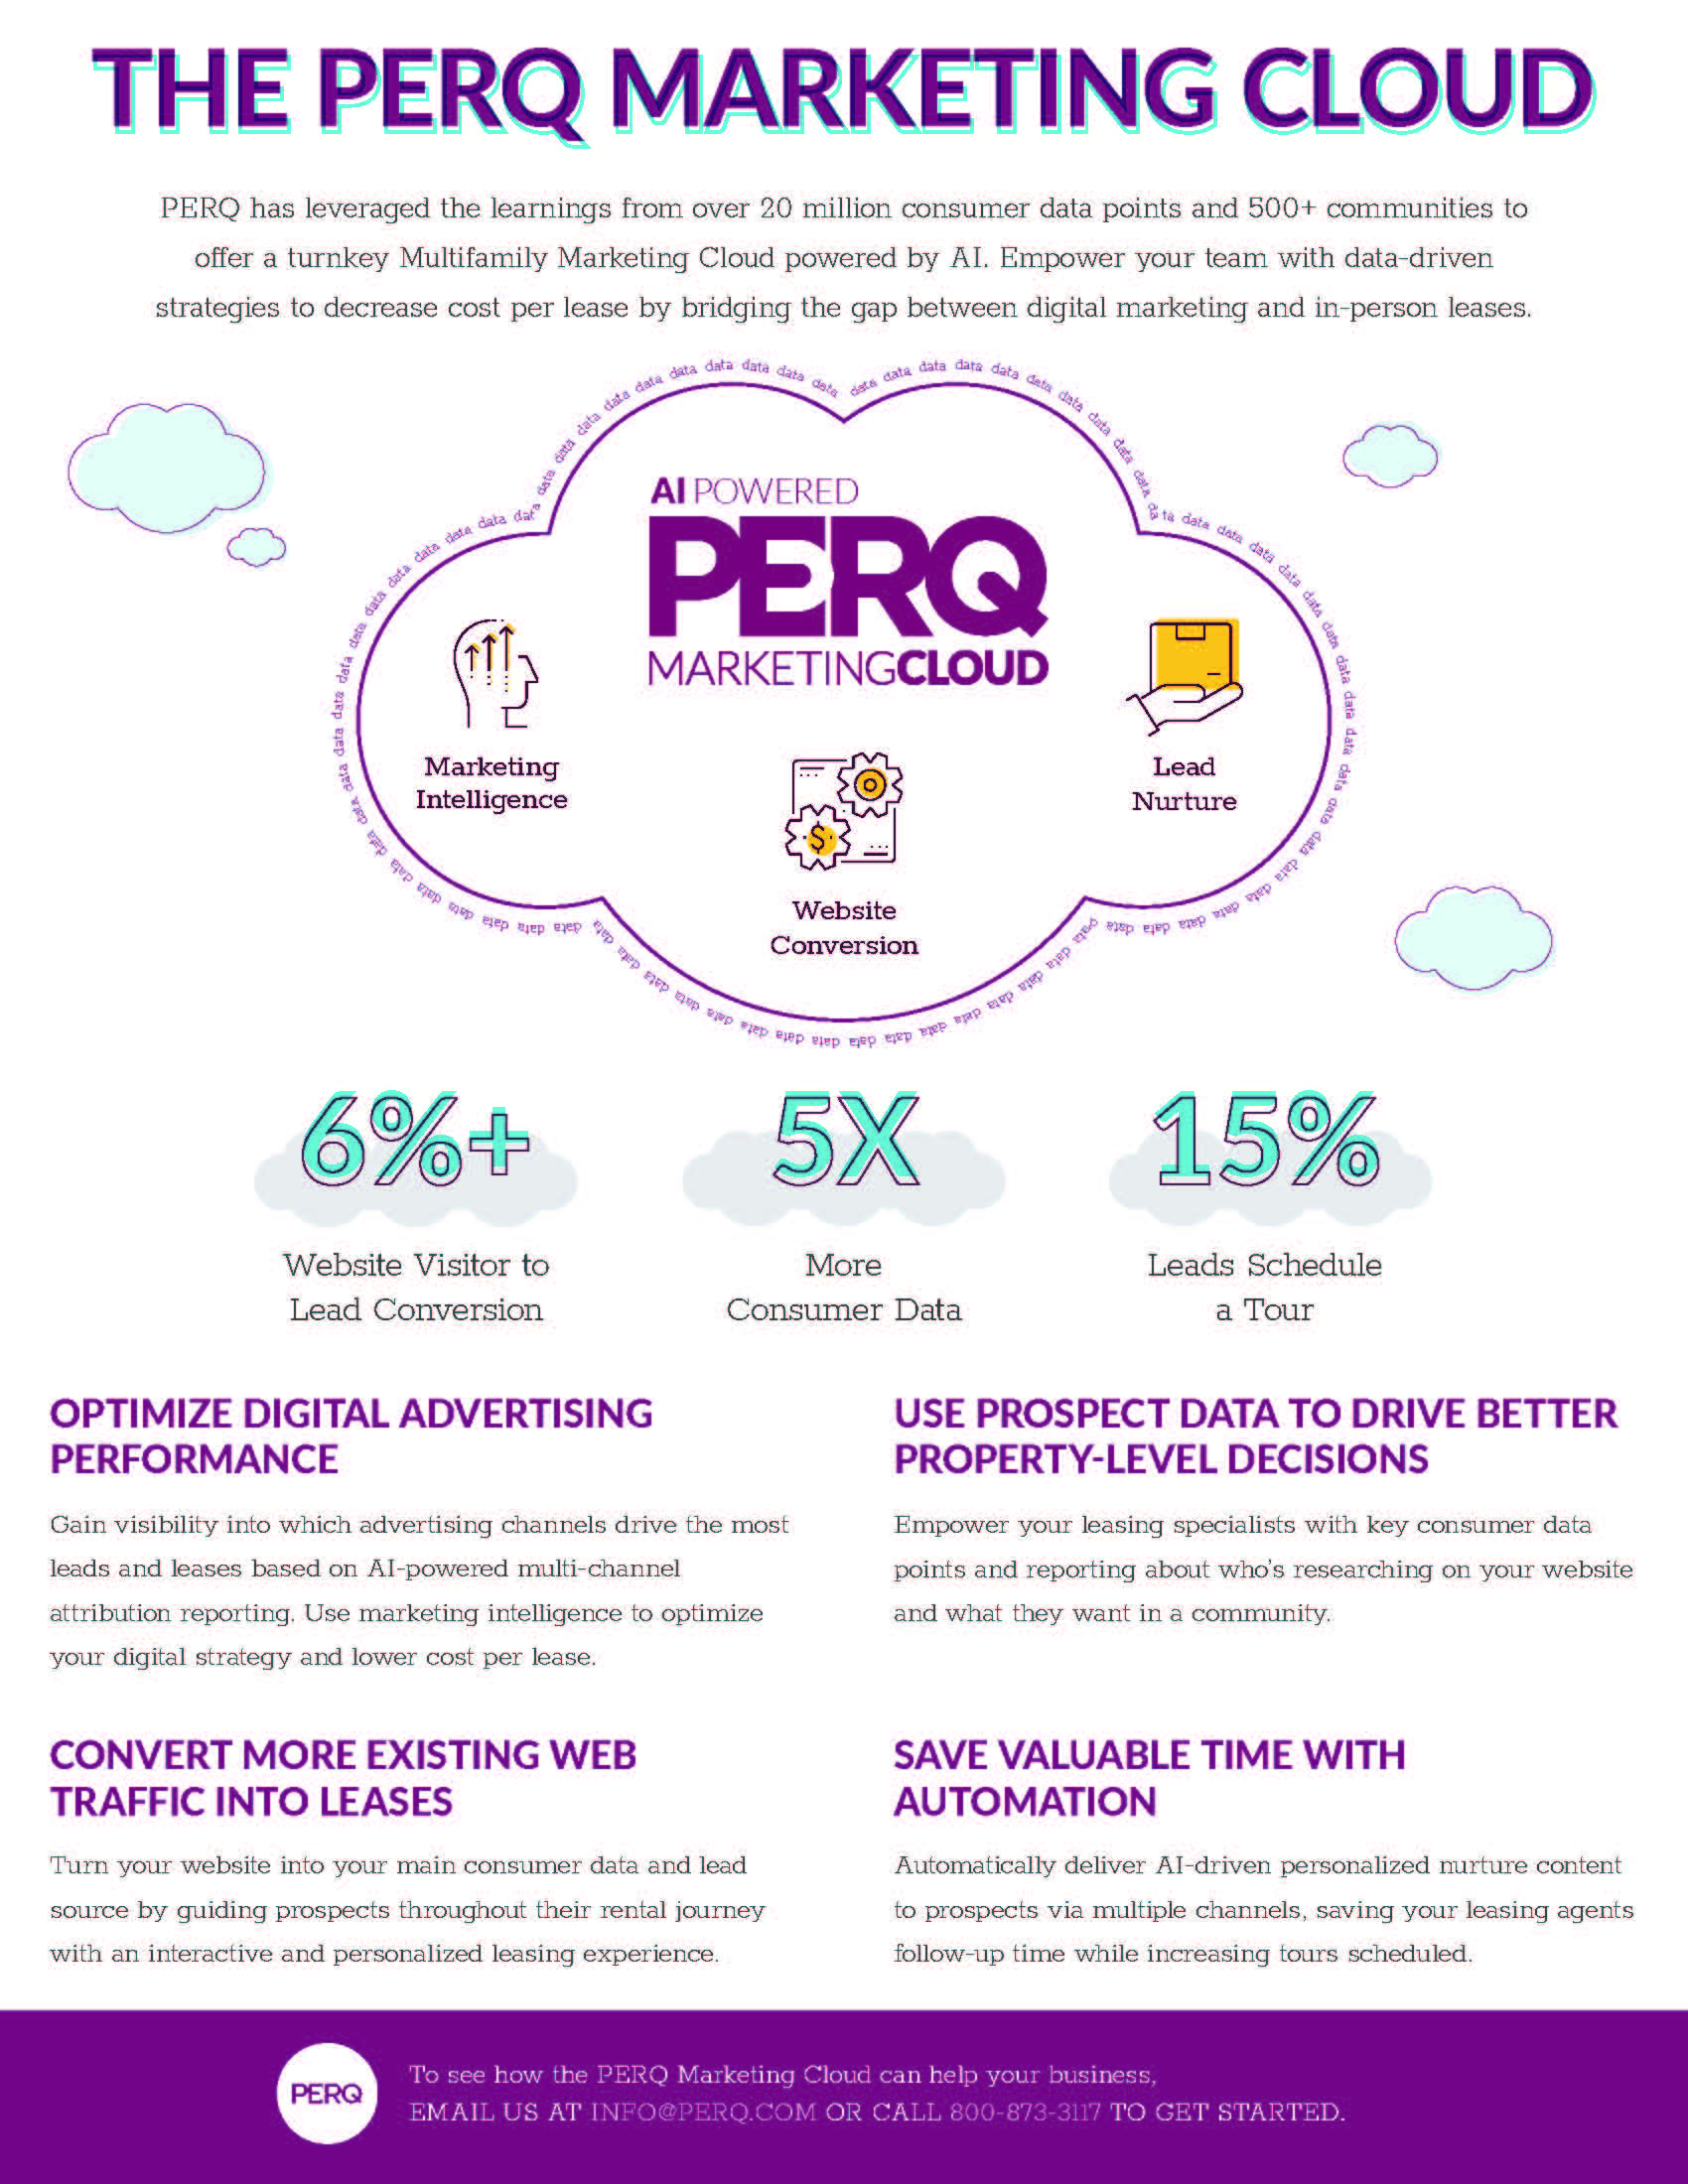 PERQ Marketing Cloud for the multifamily industry